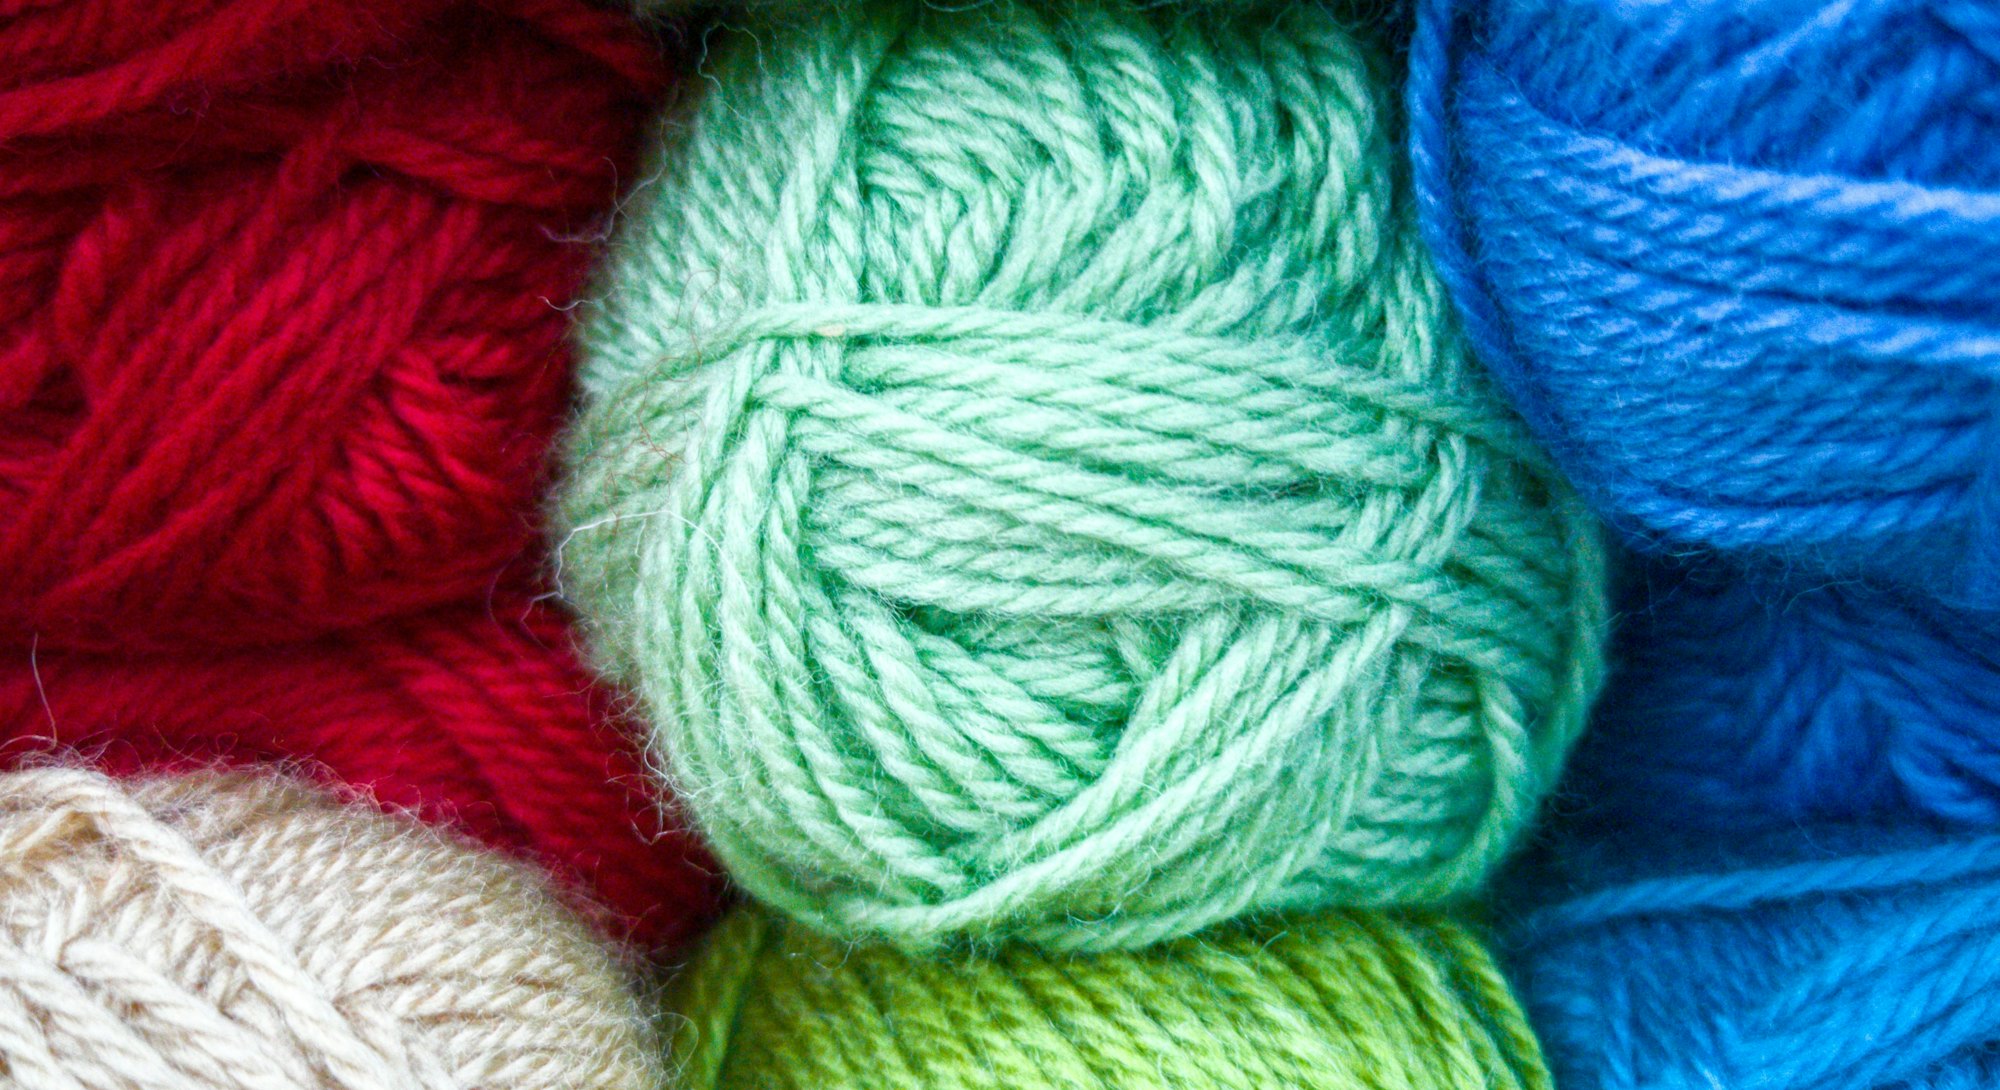 A close up of balls of yarn. This article details pandemic hobbies to do during the winter.